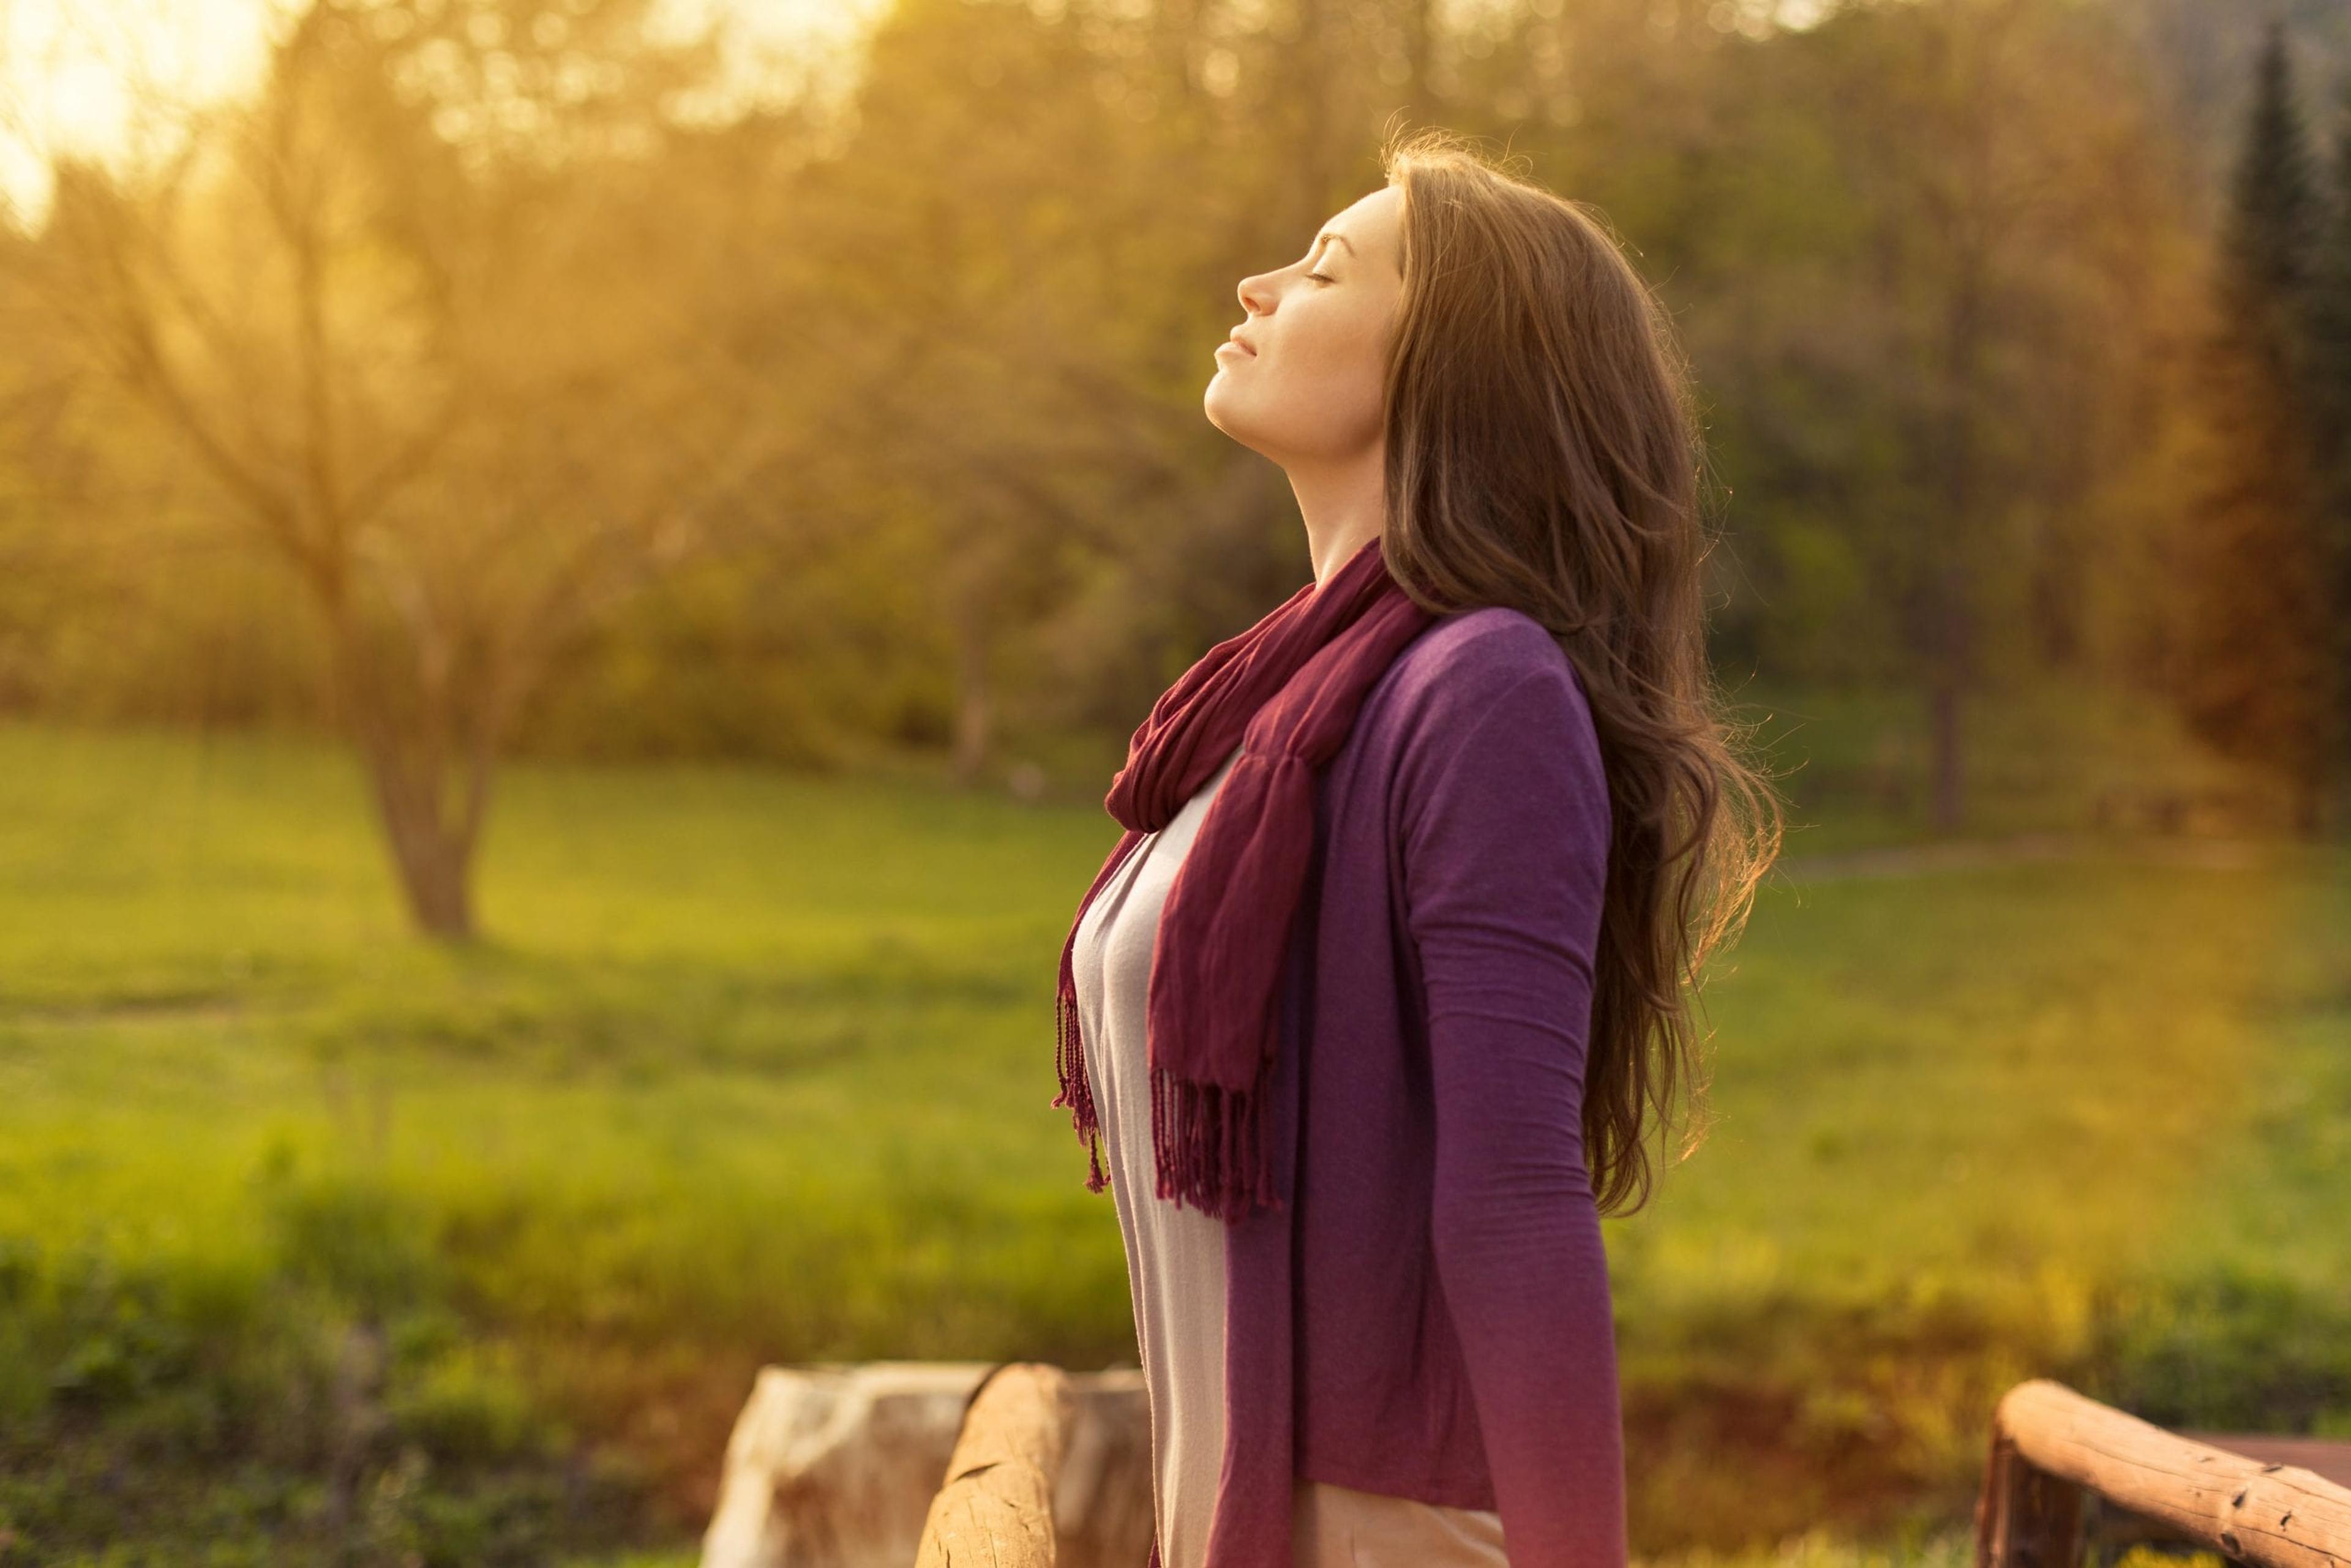 Woman with arms outstretched facing the sun, enjoying fresh air